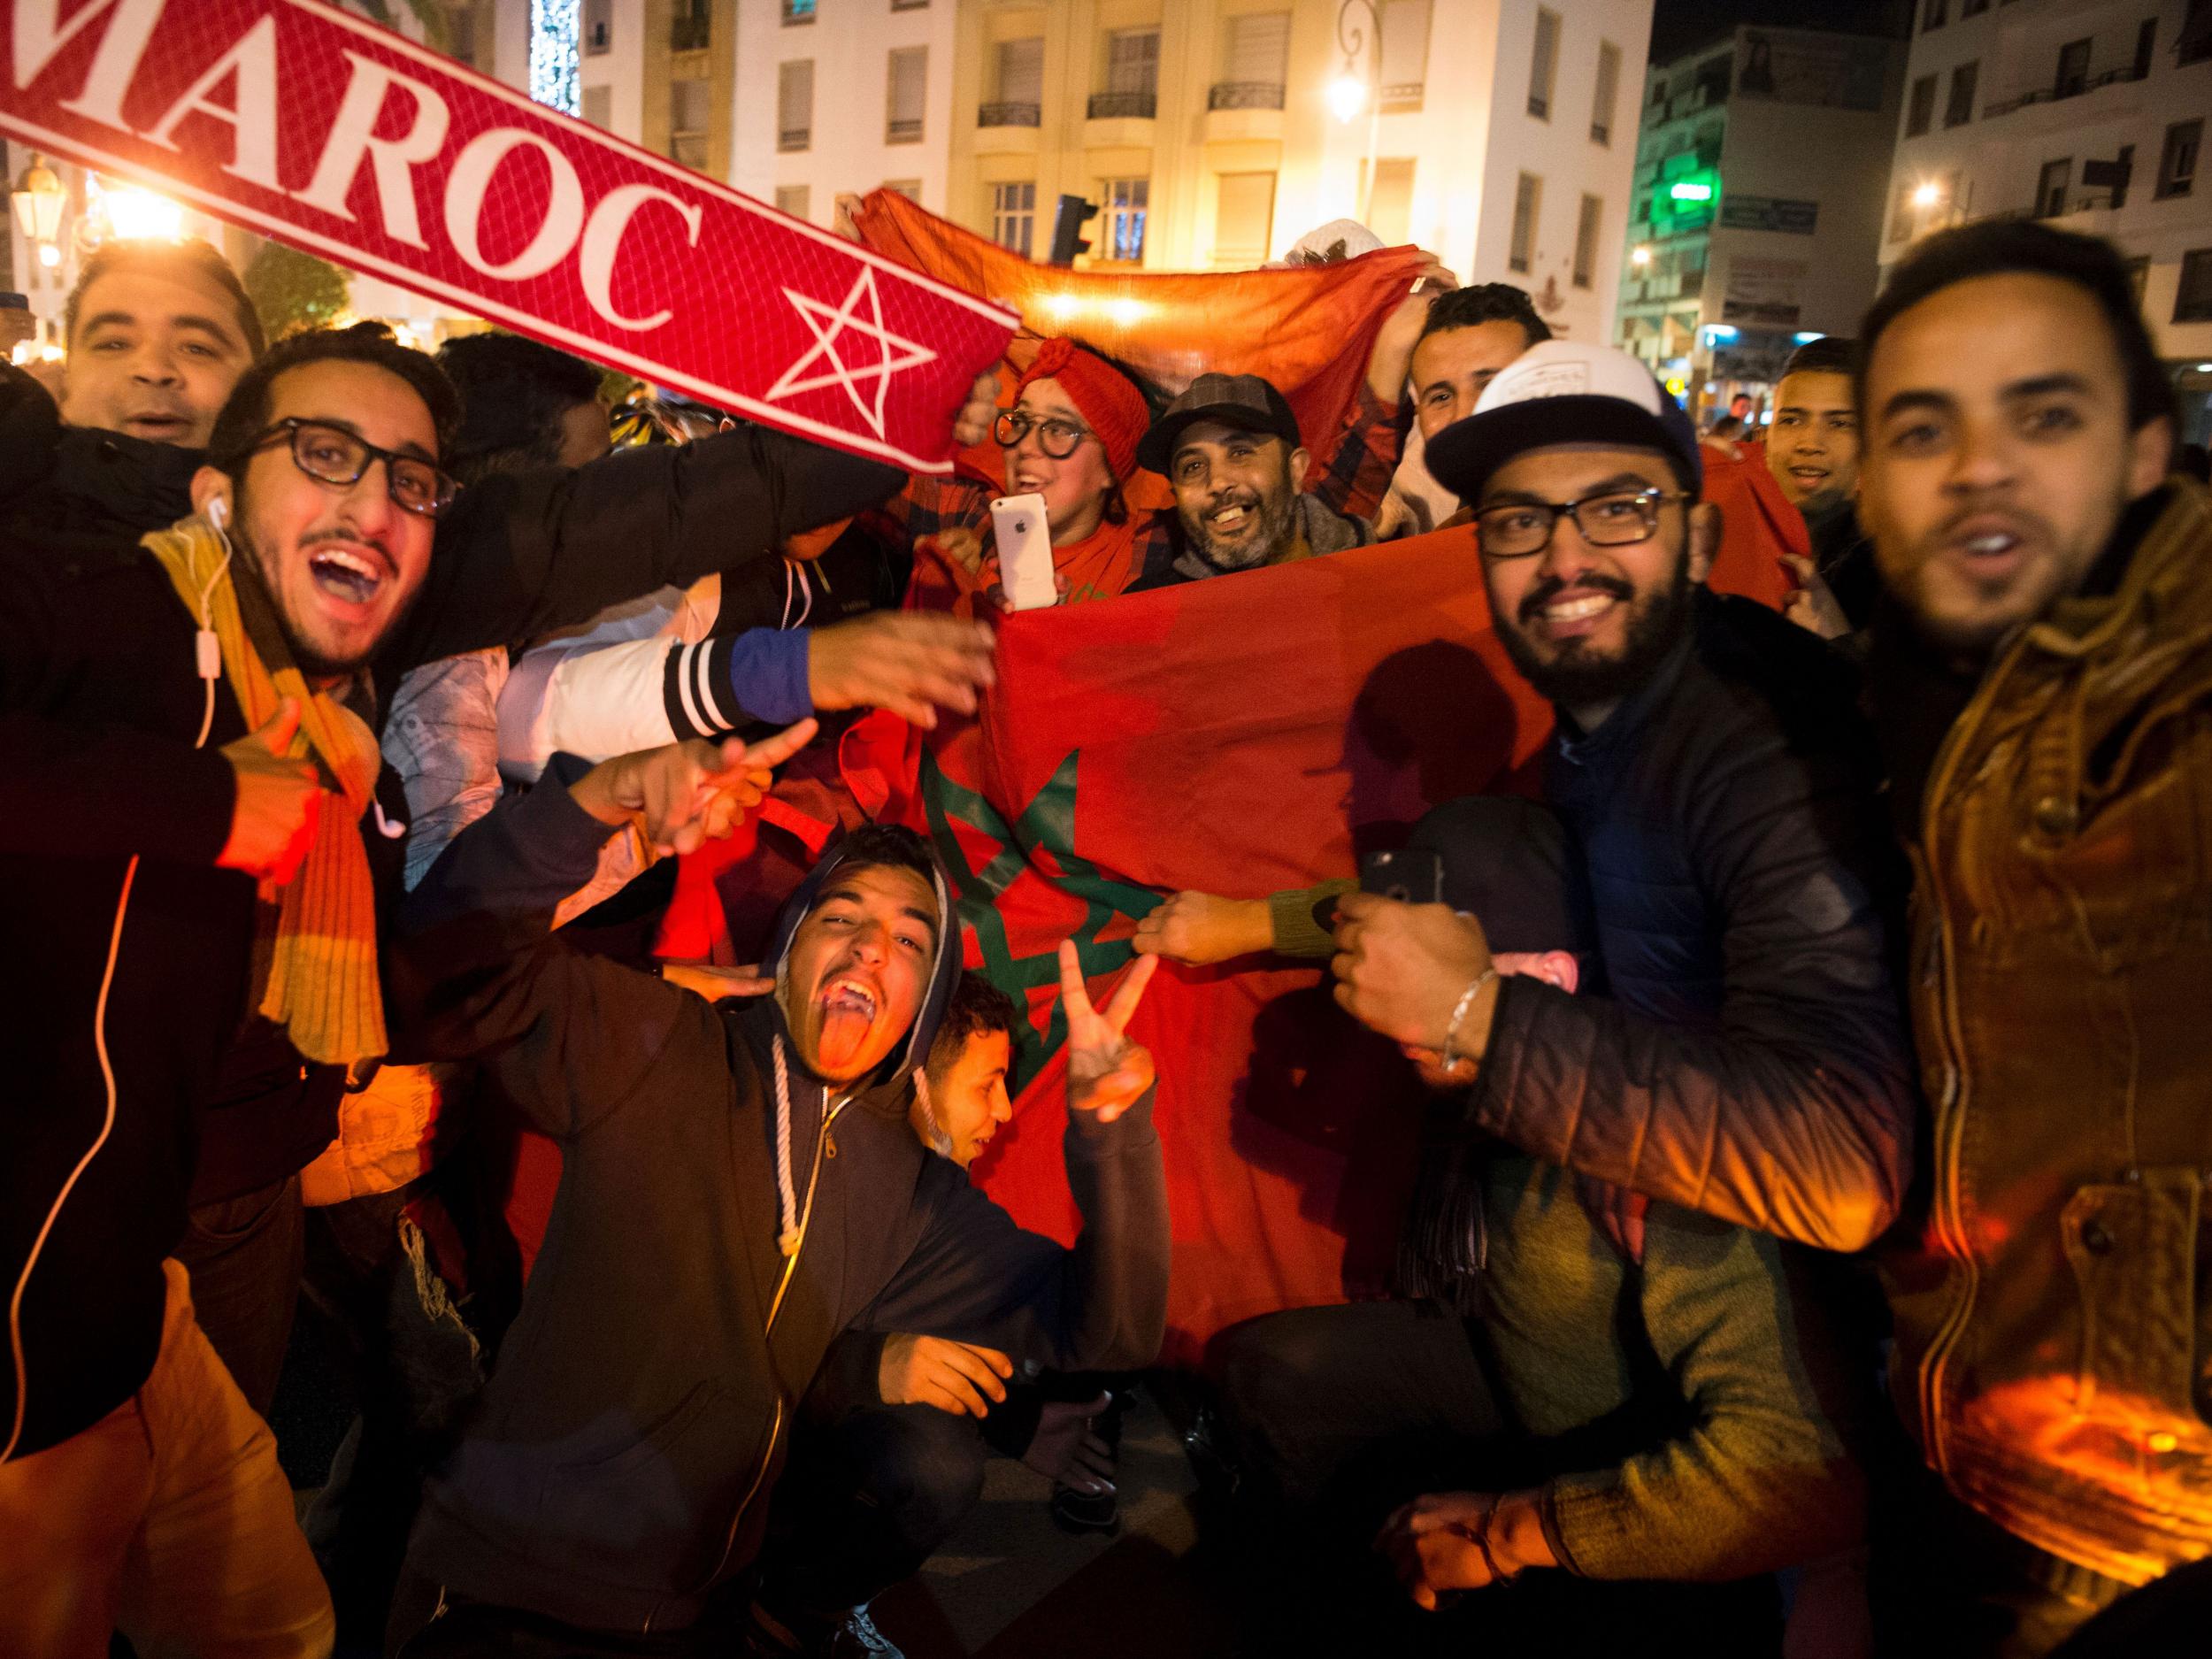 Moroccan fans celebrate their side's progress during the African Cup of Nations